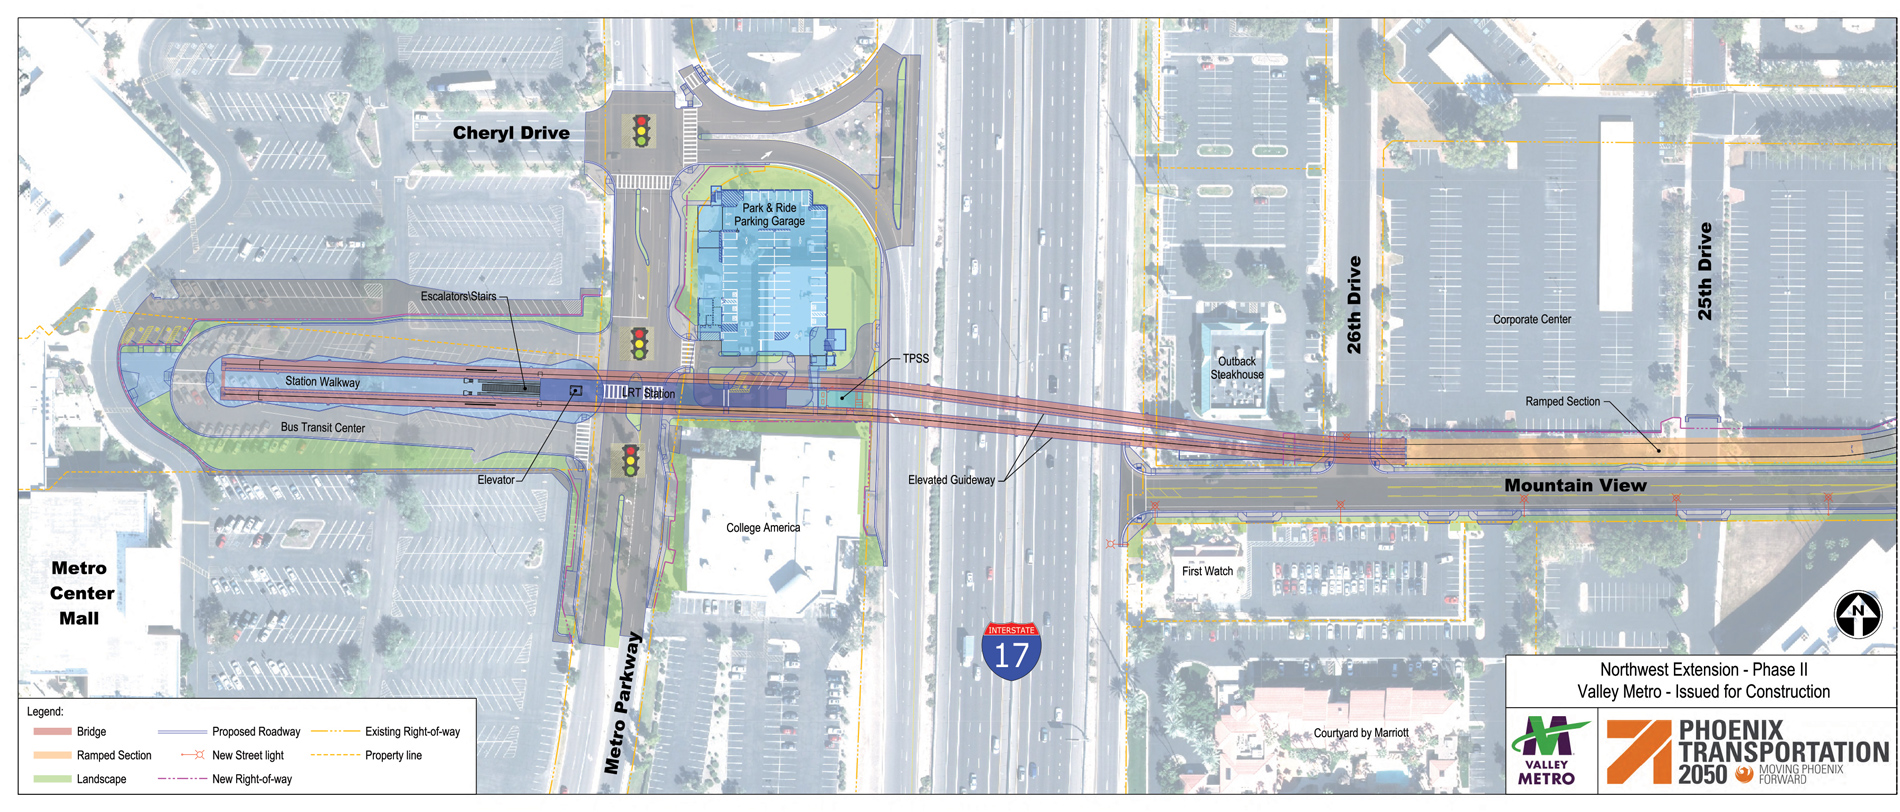 Final design for the Mountain View Road alignment is shown from where the tracks turn west from 25th Ave. to the end-of-line adjacent to the former Metrocenter Mall. The tracks are aligned north of the roadway and cross over I-17 on two (light rail only) bridges. The end-of-line has a light rail station, which is elevated. Below the station is a transit center, which will be relocated from the existing one, currently located near the southwest mall property. Adjacent to the light rail station is a four-story park-and-ride garage for transit users, which will accommodate approximately 260 vehicles.